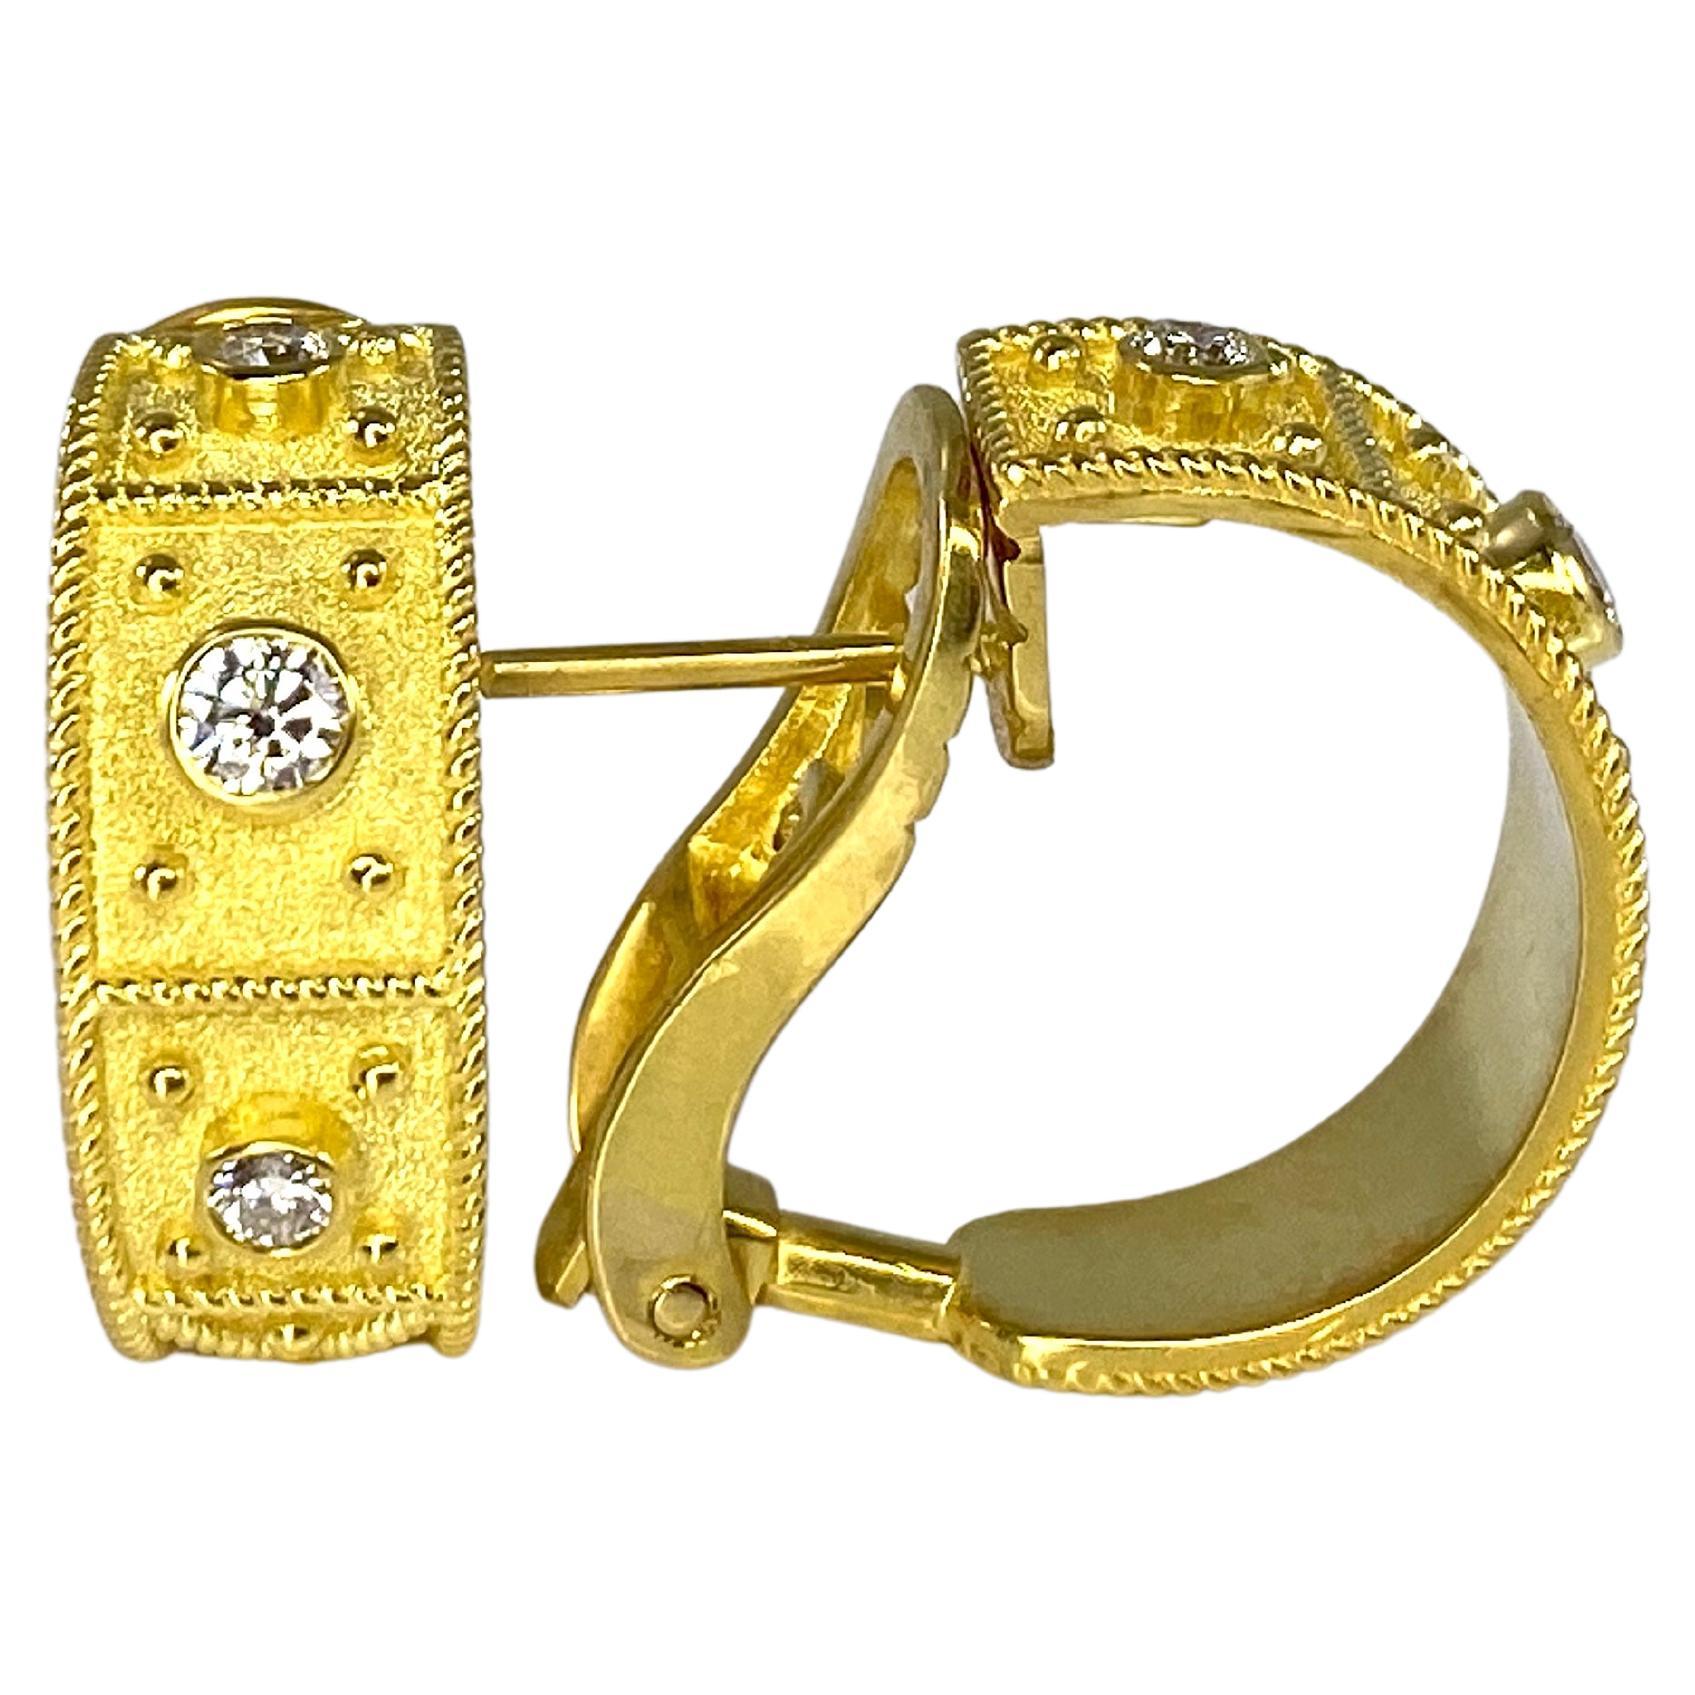 Georgios Collections 18 Karat Gold Byzantine Clip Hoop Earrings with Diamonds